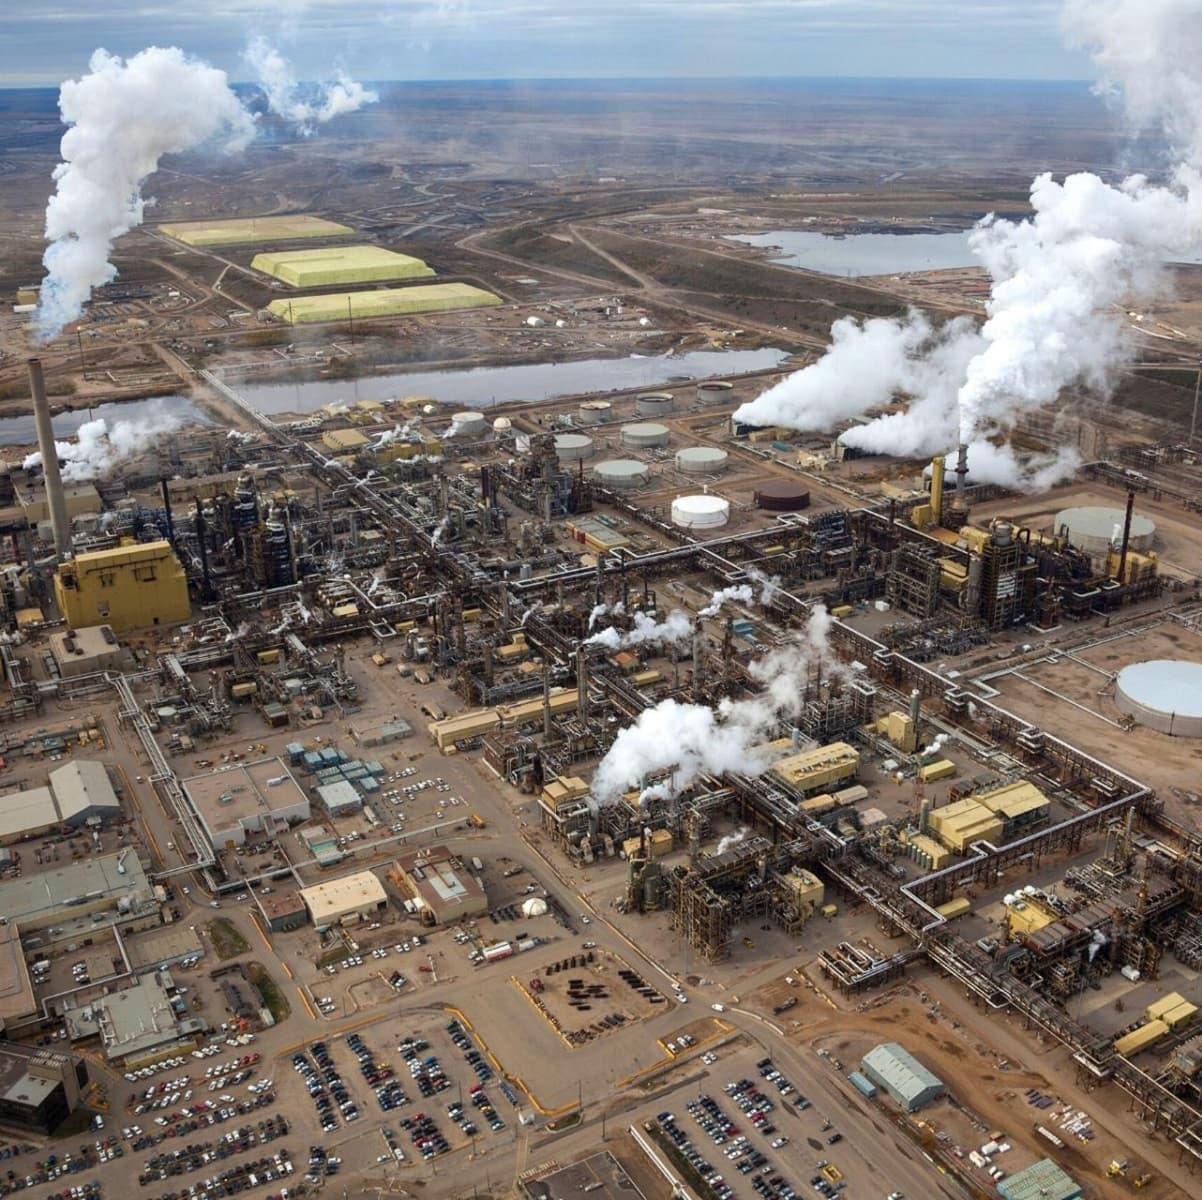 An overhead view of an oil refinery from the sky. There is a network of buildings, industrial-sized vats and tall smokestacks emitting smoke and other pollution. In the distance, we see a river.